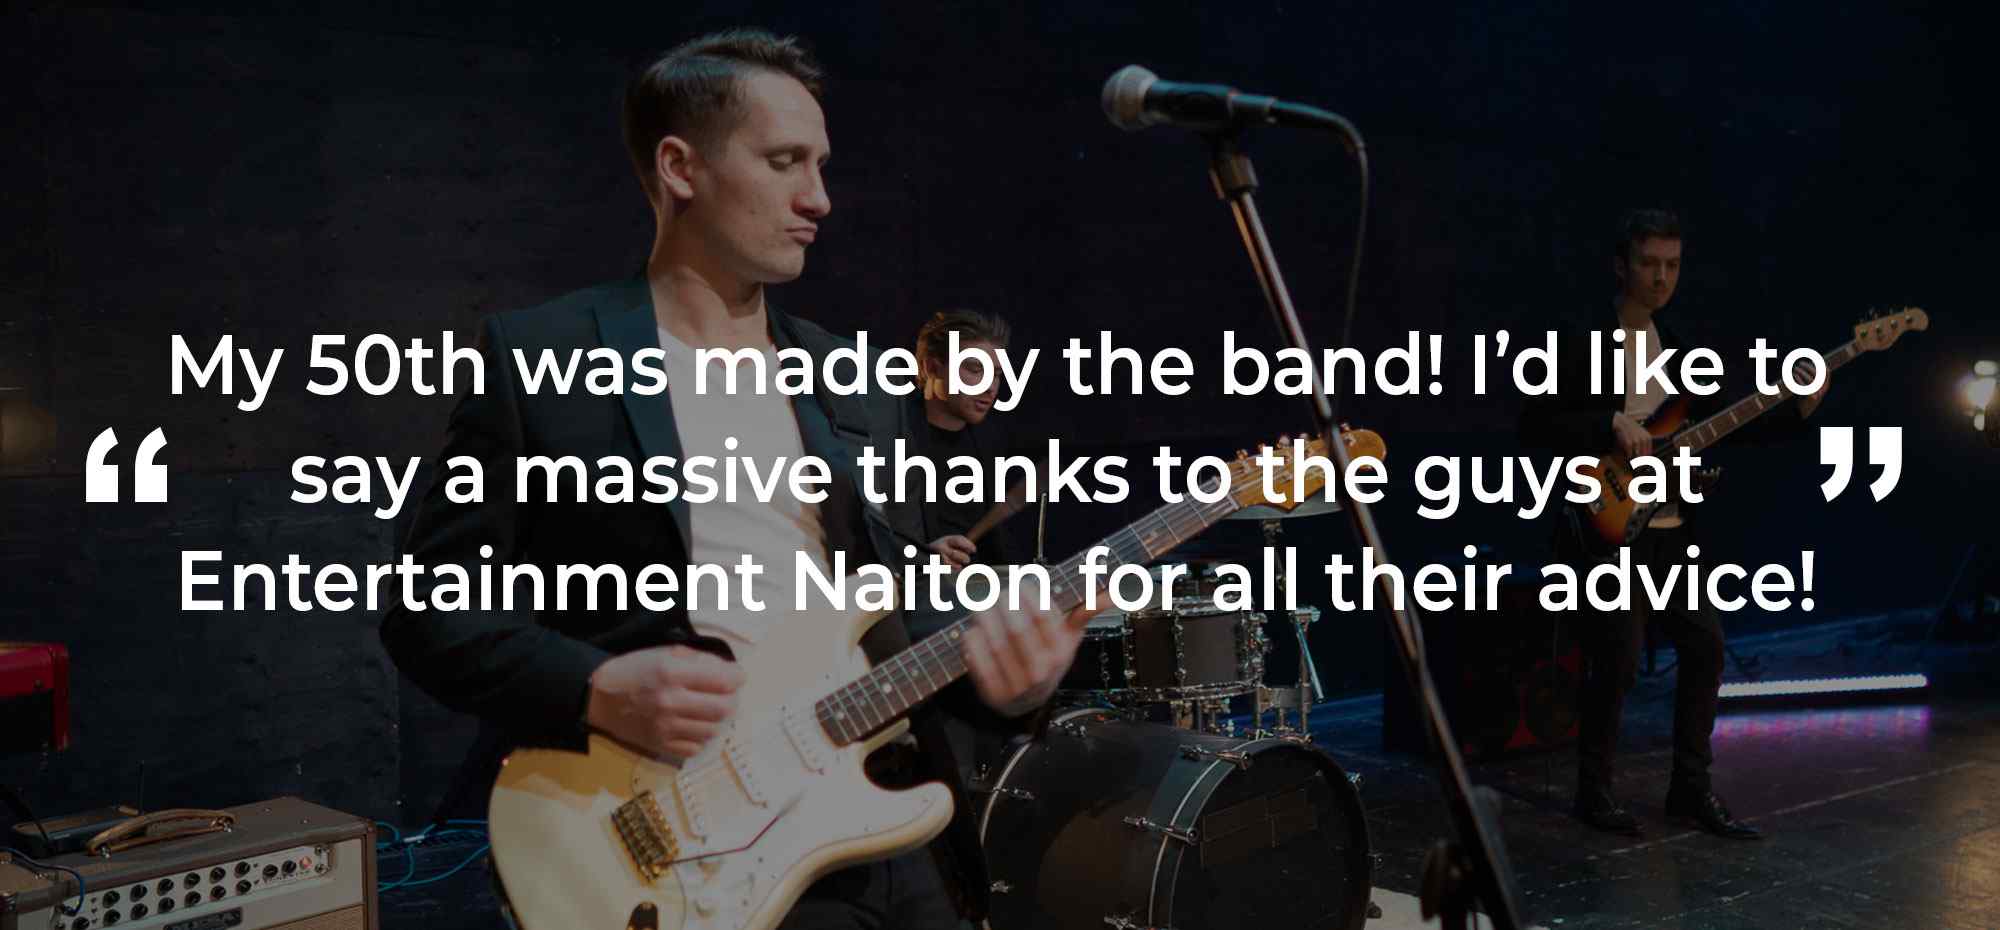 Client Review of a Party Band Ceredigion